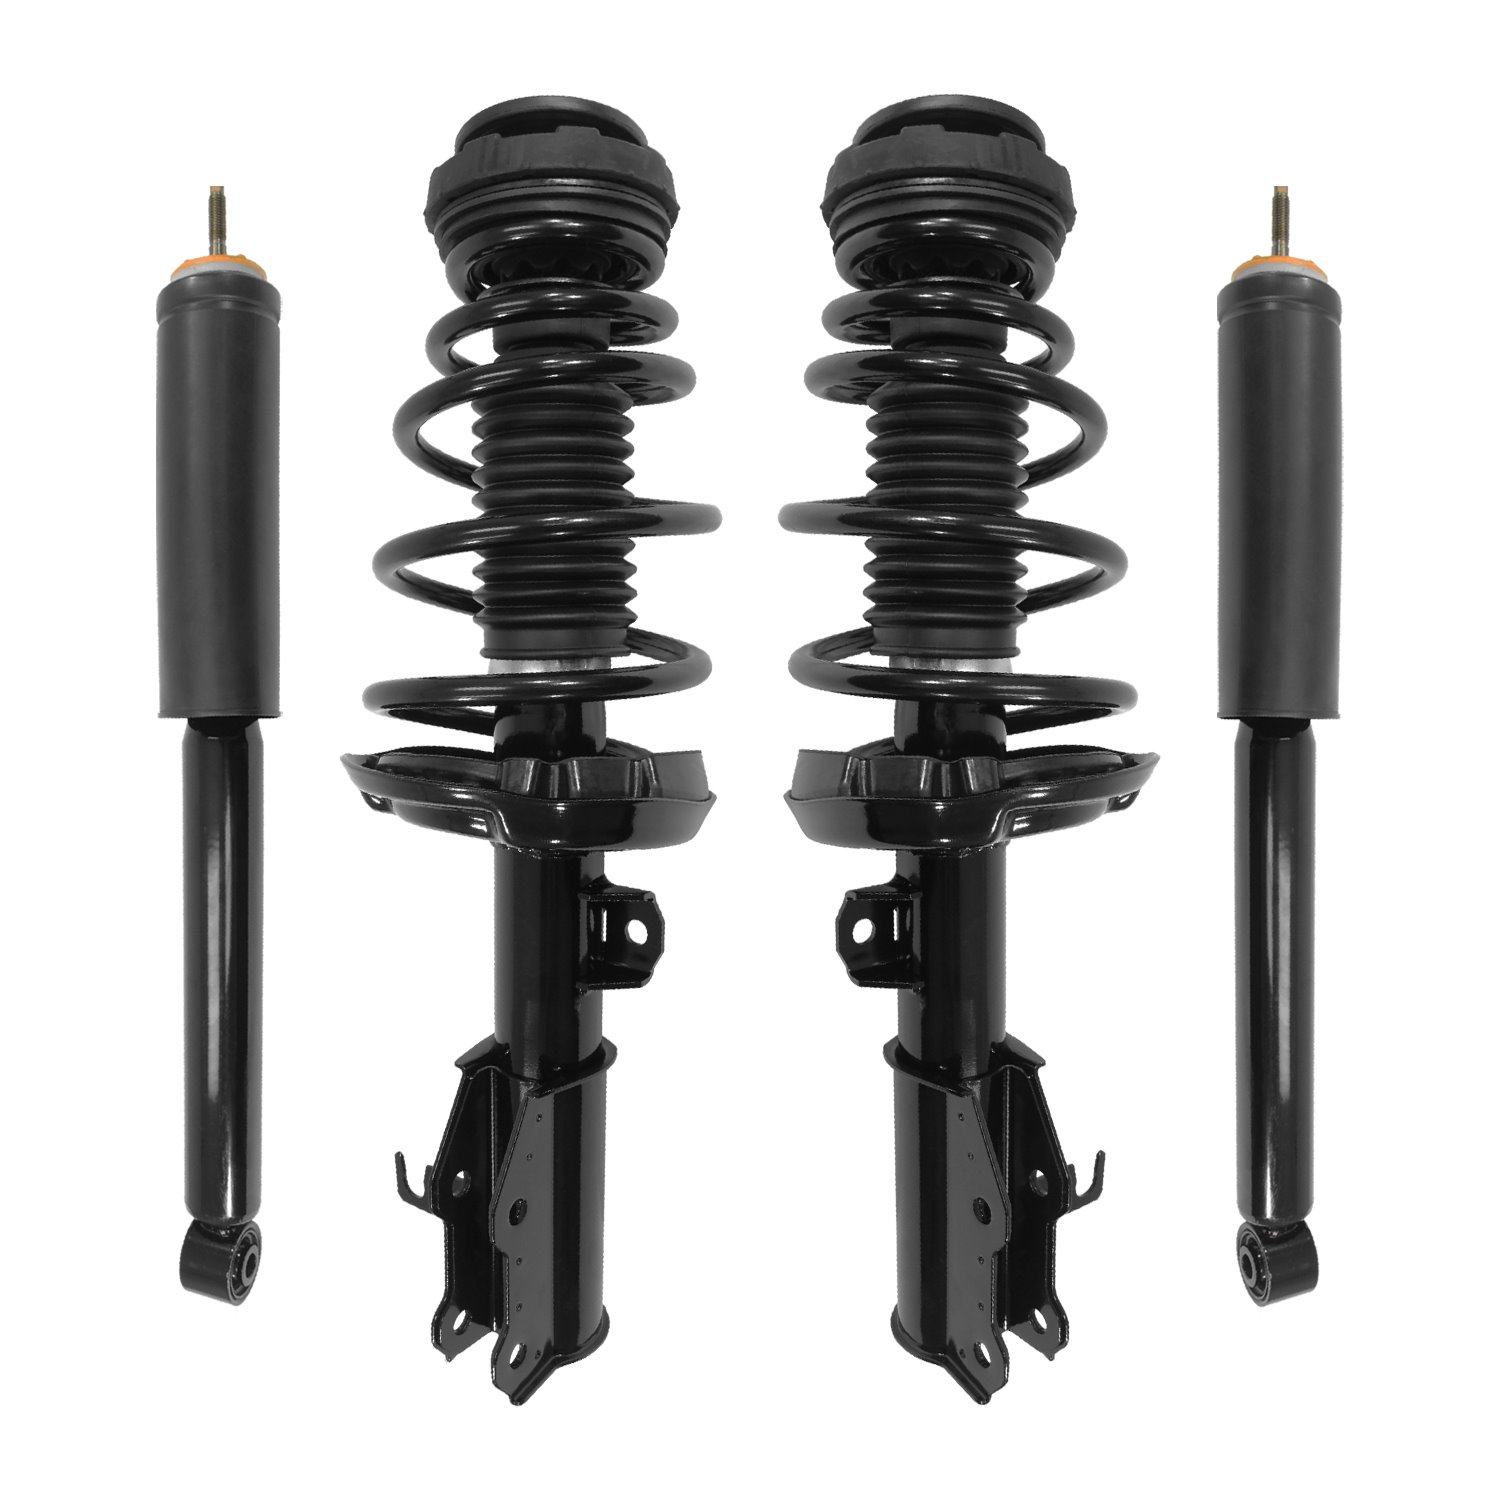 4-11037-251320-001 Front & Rear Suspension Strut & Coil Spring Assembly Fits Select Buick LaCrosse